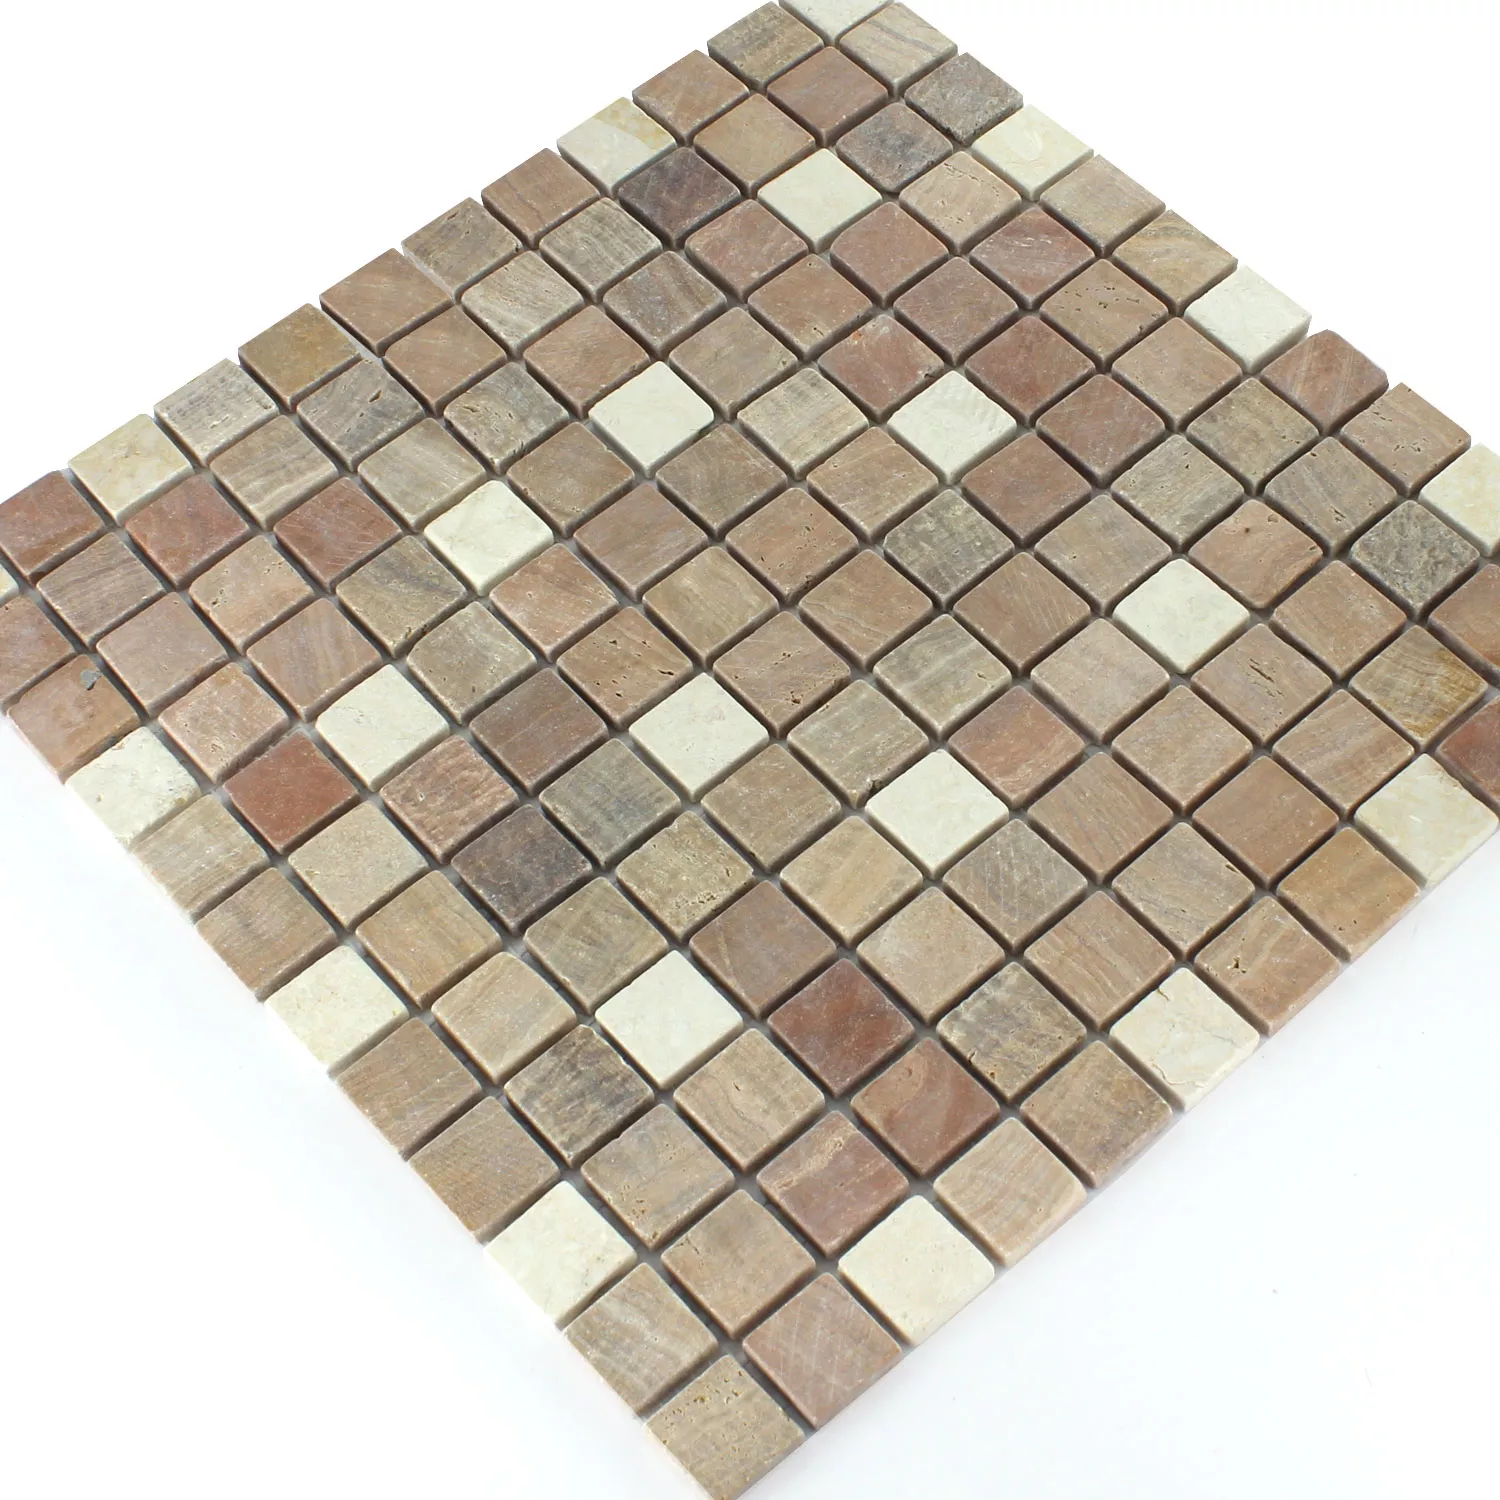 Sample Mosaic Tiles Marble Cotto Mix 